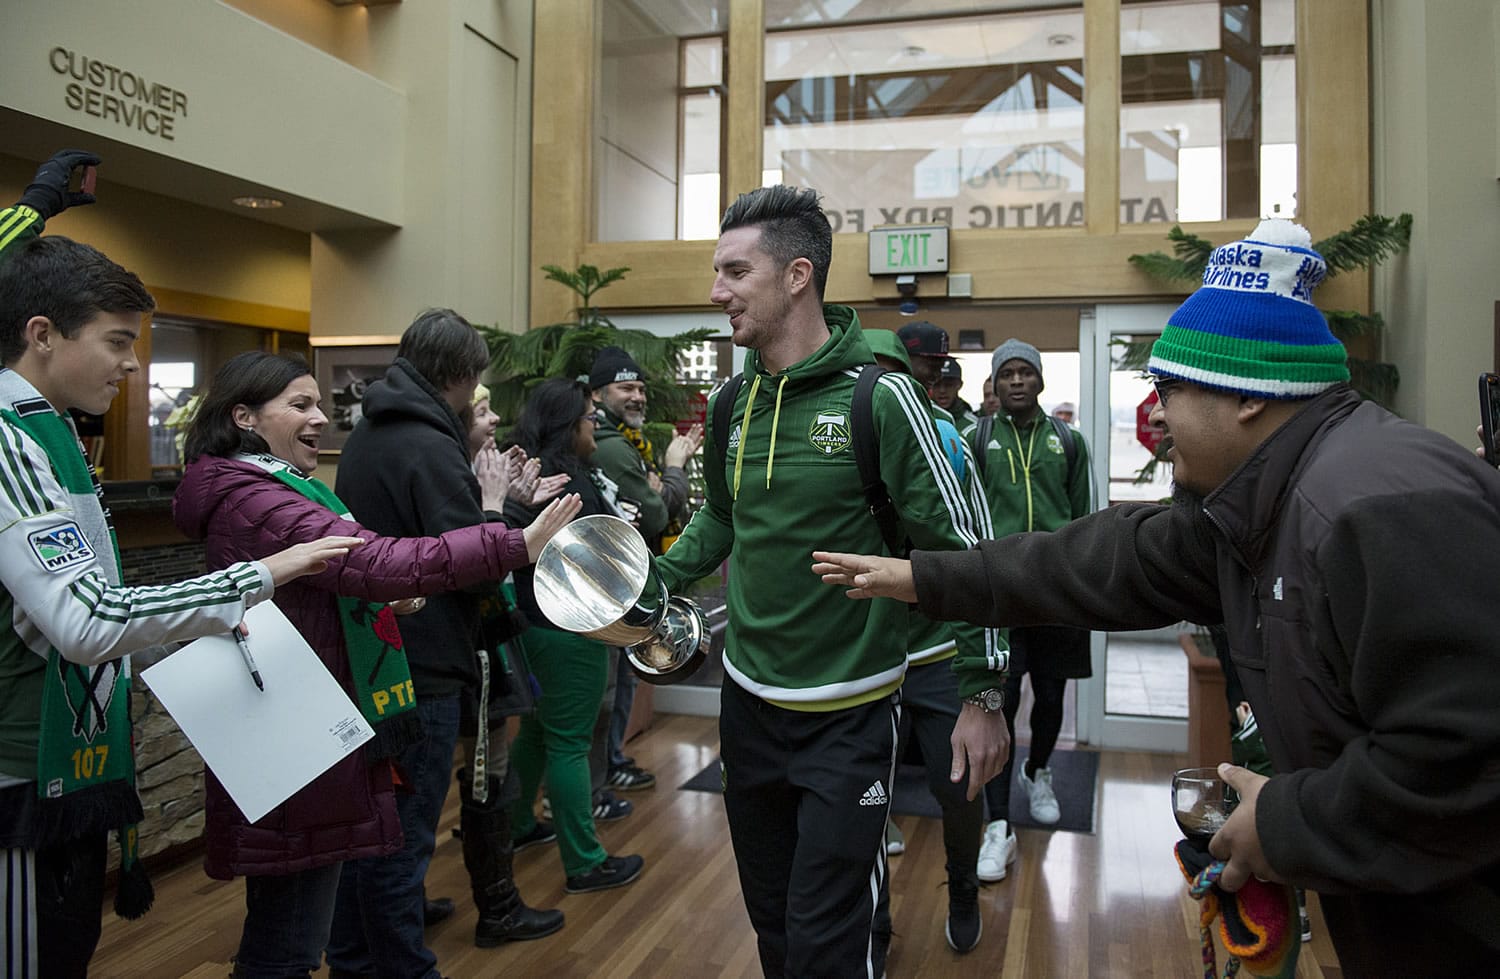 Timbers&#039; team captain Liam Ridgewell, center, greets a crowd of fans after arriving at the Business Aviation Terminal in Portland with teammates Monday morning, Nov. 30, 2015. The team was celebrating after winning the Major League Soccer Western Conference Championship.